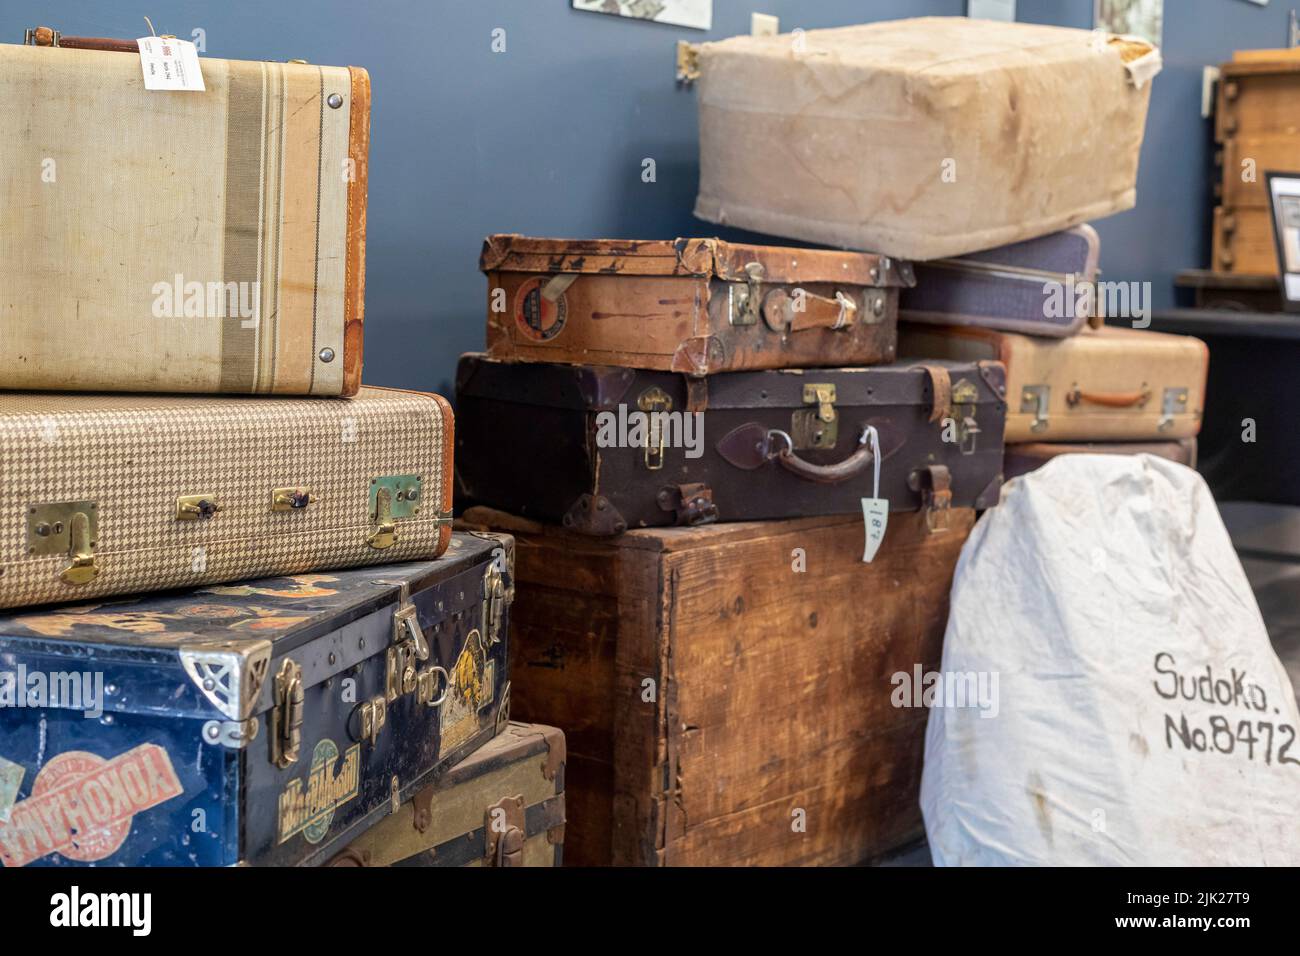 Granada, Colorado - The Amache Museum near the World War 2 Amache Japanese internment camp displays suitcases that internees brought with them when ev Stock Photo